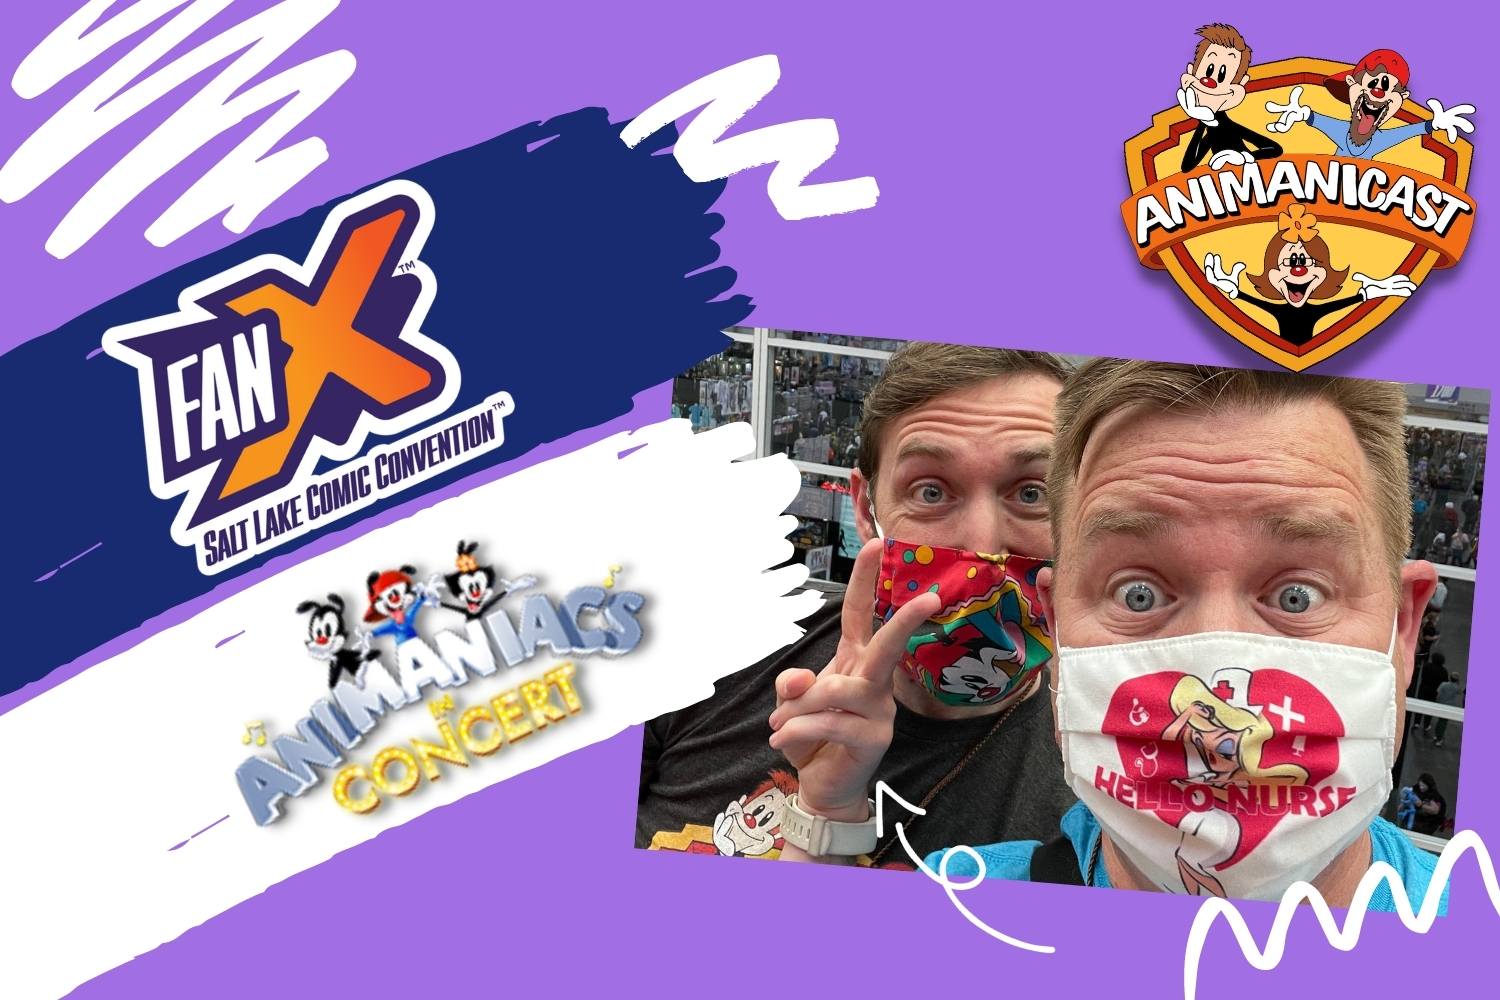 Animanicast Goes to Salt Lake FanX and Animaniacs in Concert!